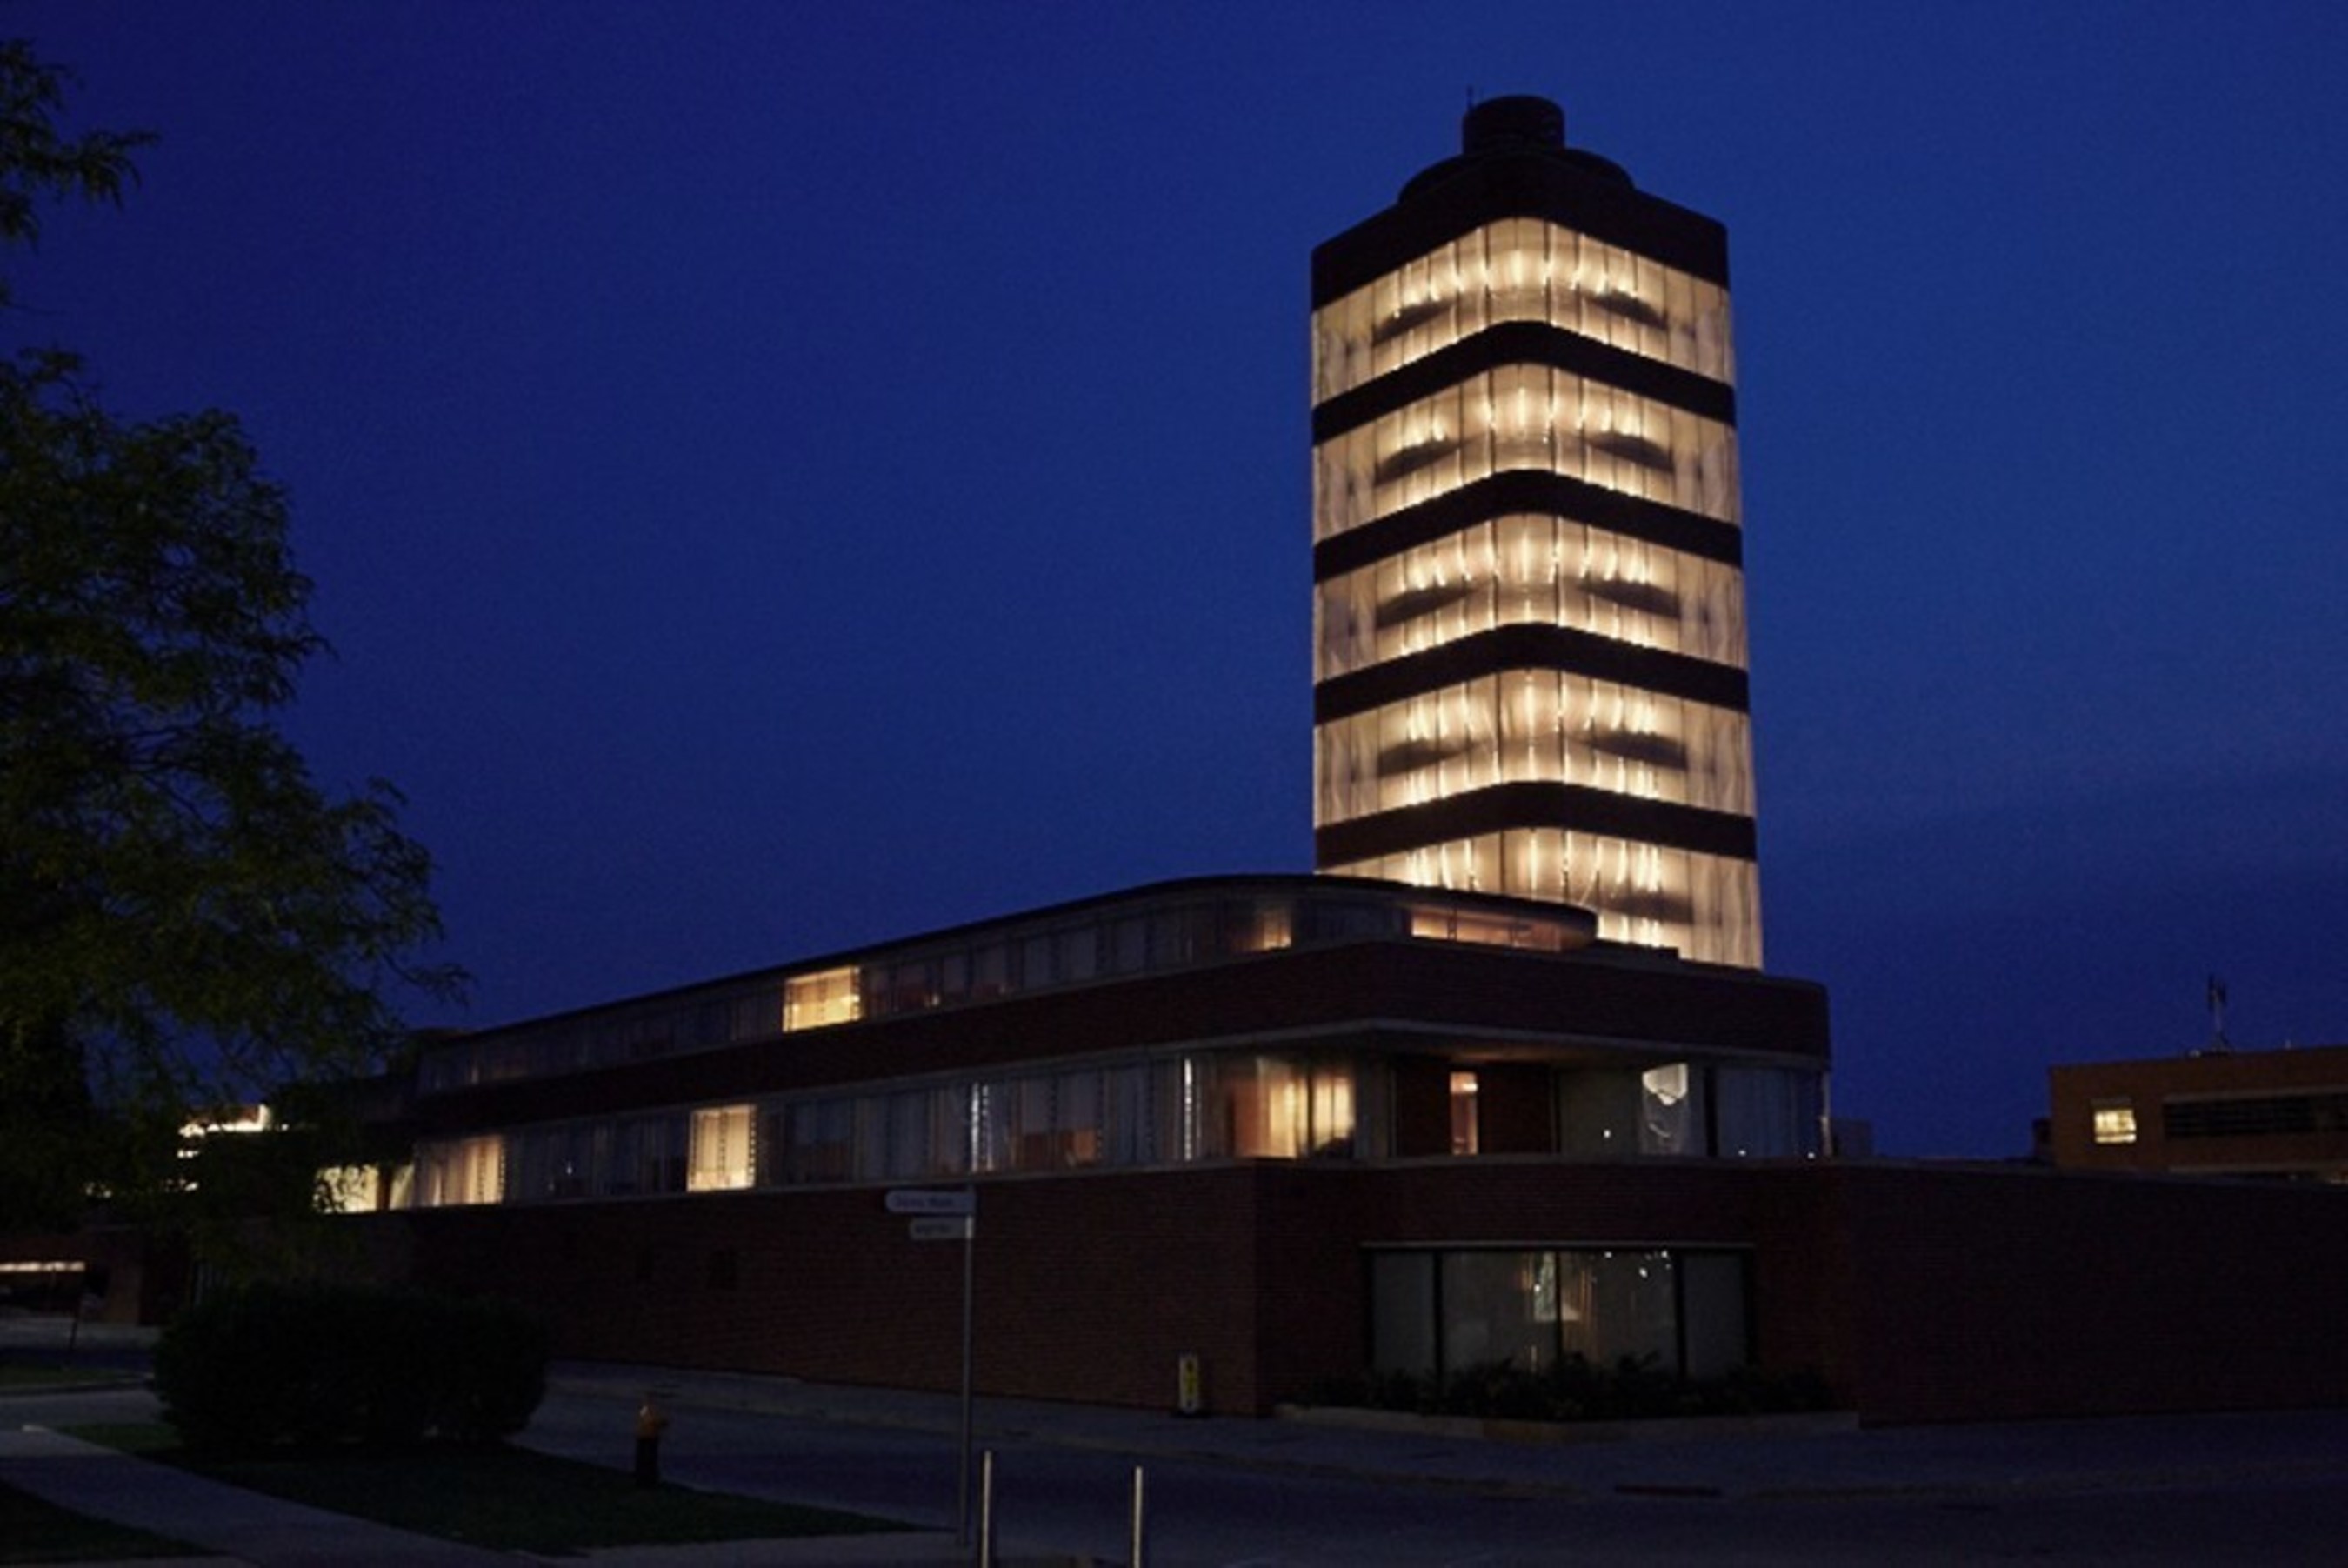 SC Johnson's research tower in Racine, Wisconsin, designed by Frank Lloyd Wright, lit up in the night sky